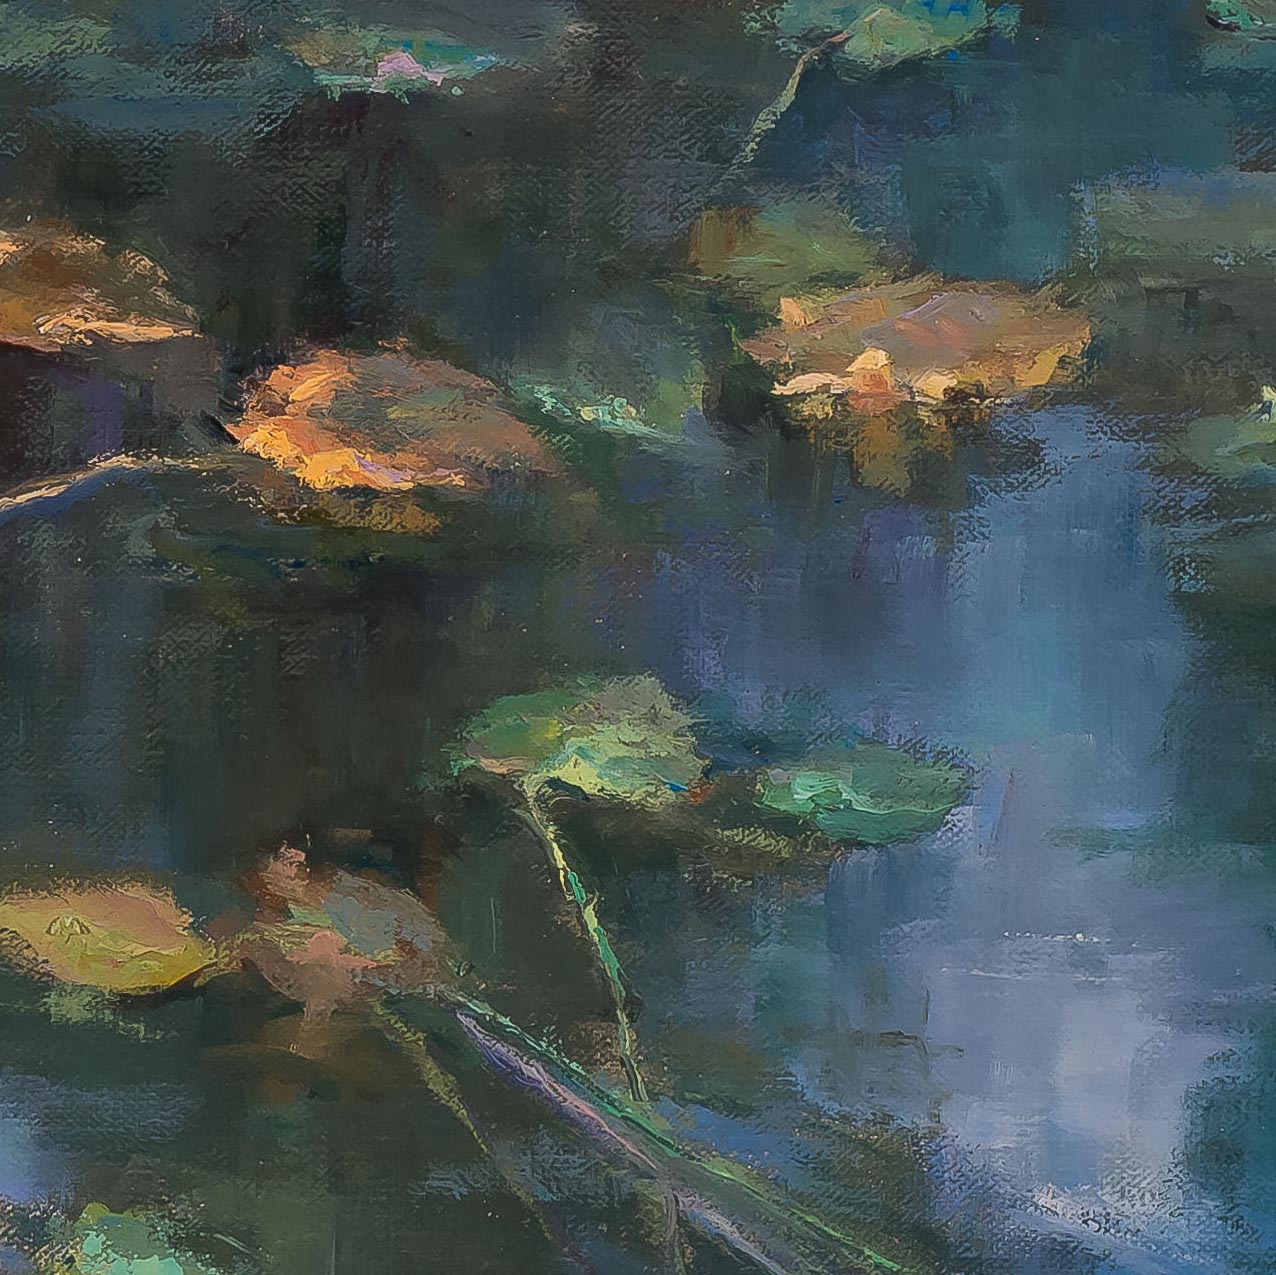 Northwoods Lake - painting by Sue Wipf photographed by Mitch Rossow -detail